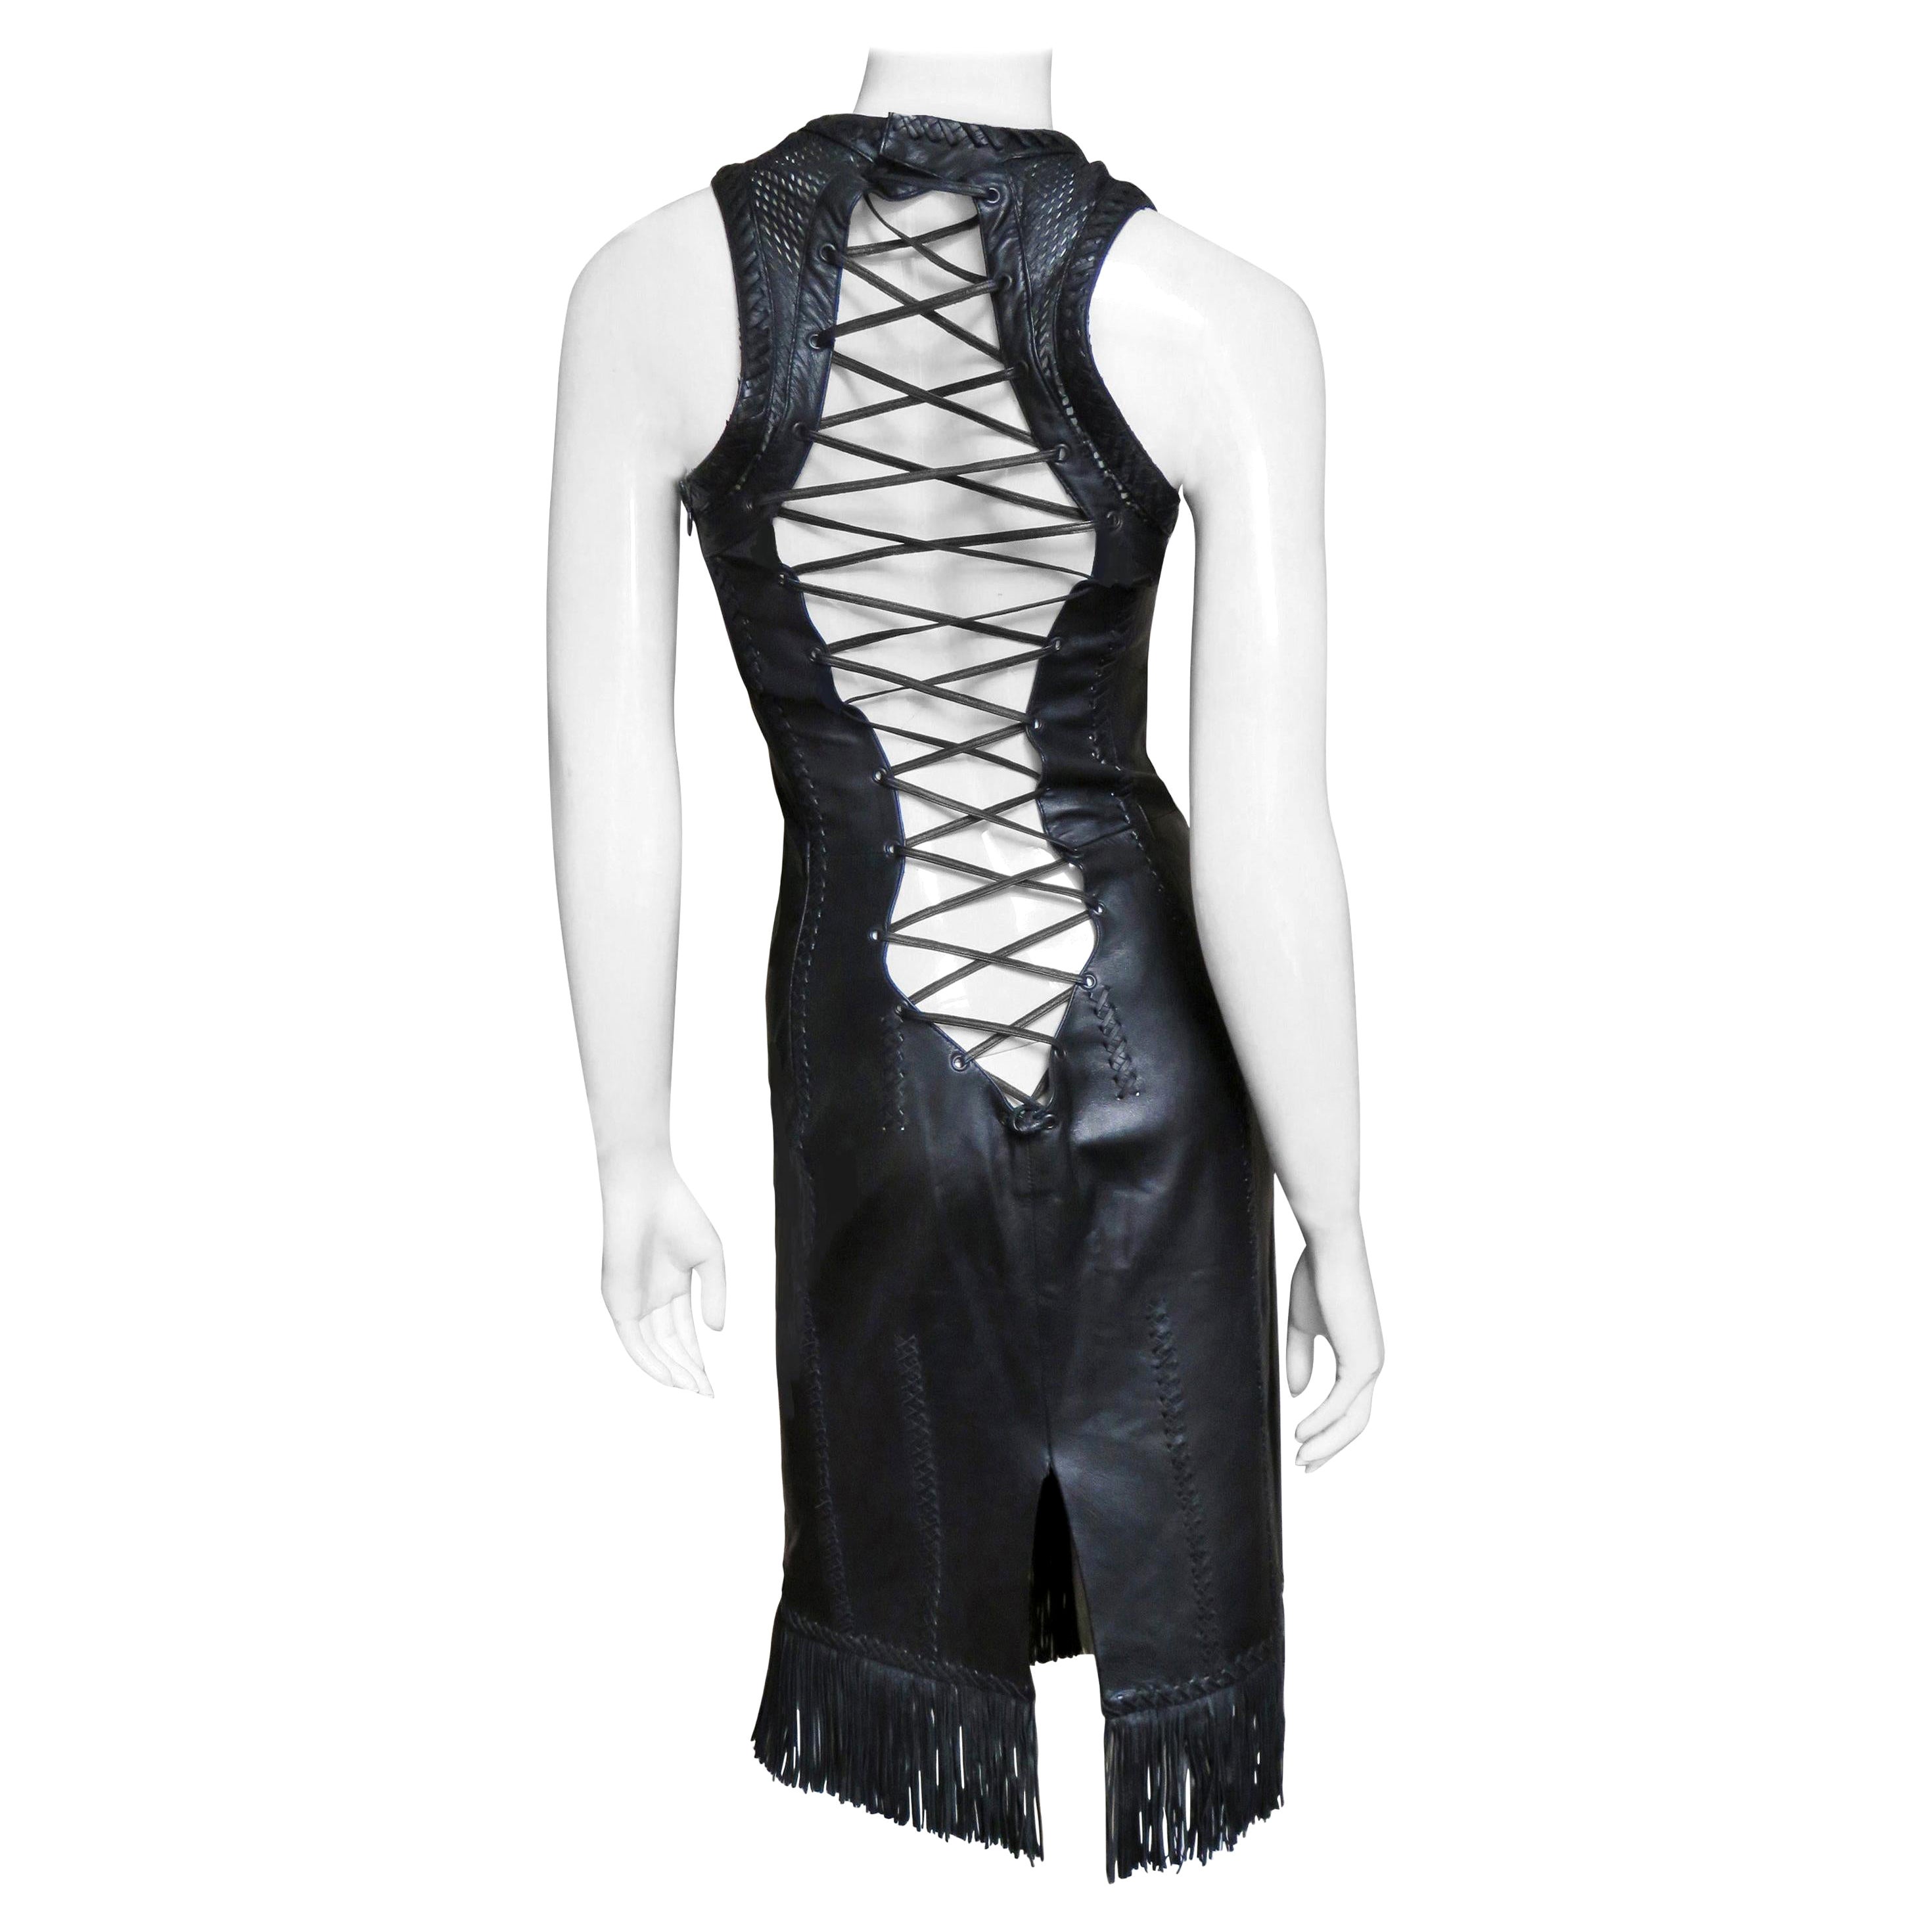  Gianni Versace Leather Lace up Dress S/S 2002 For Sale